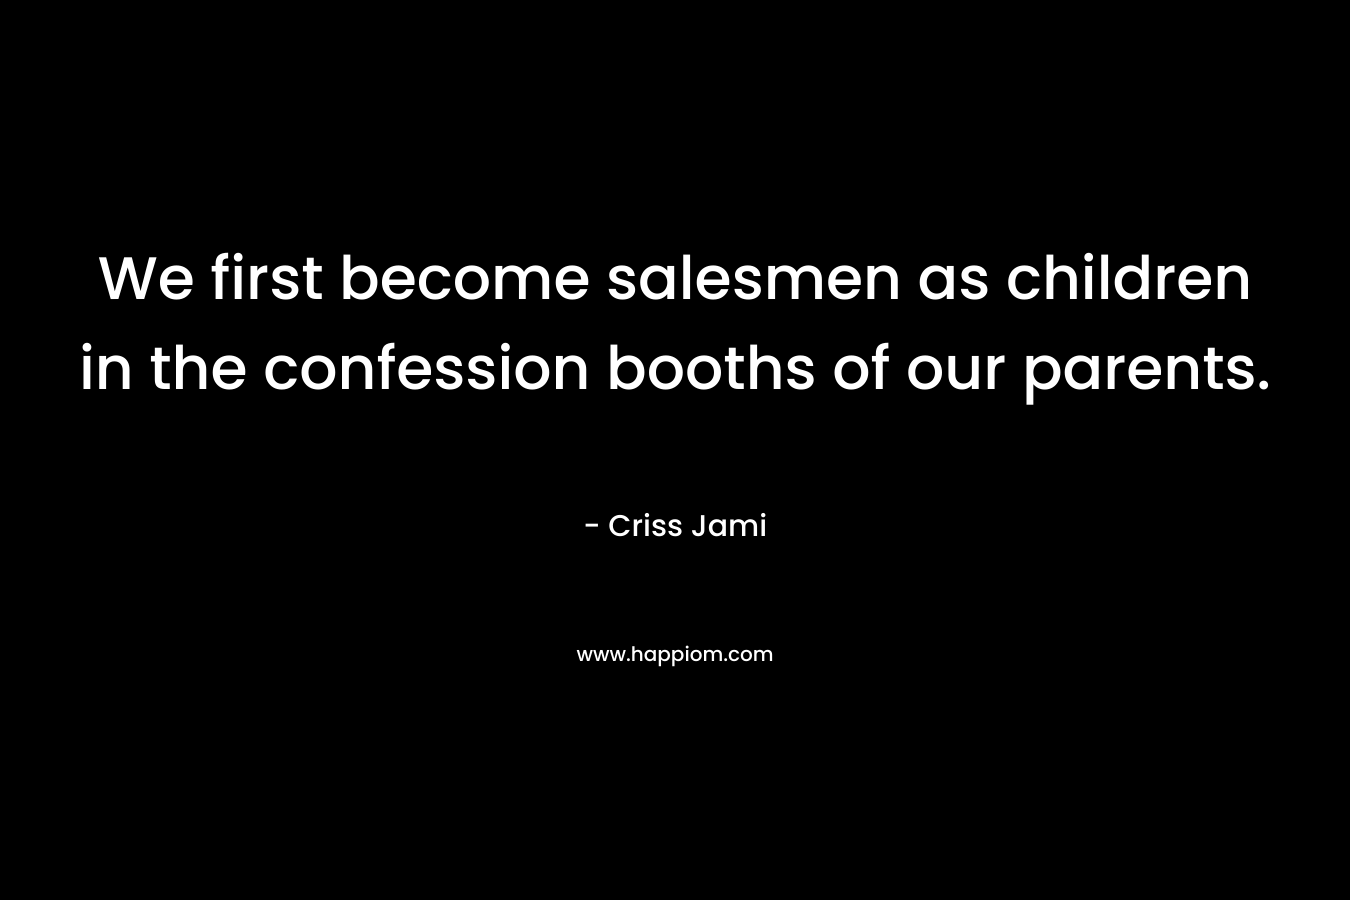 We first become salesmen as children in the confession booths of our parents. – Criss Jami